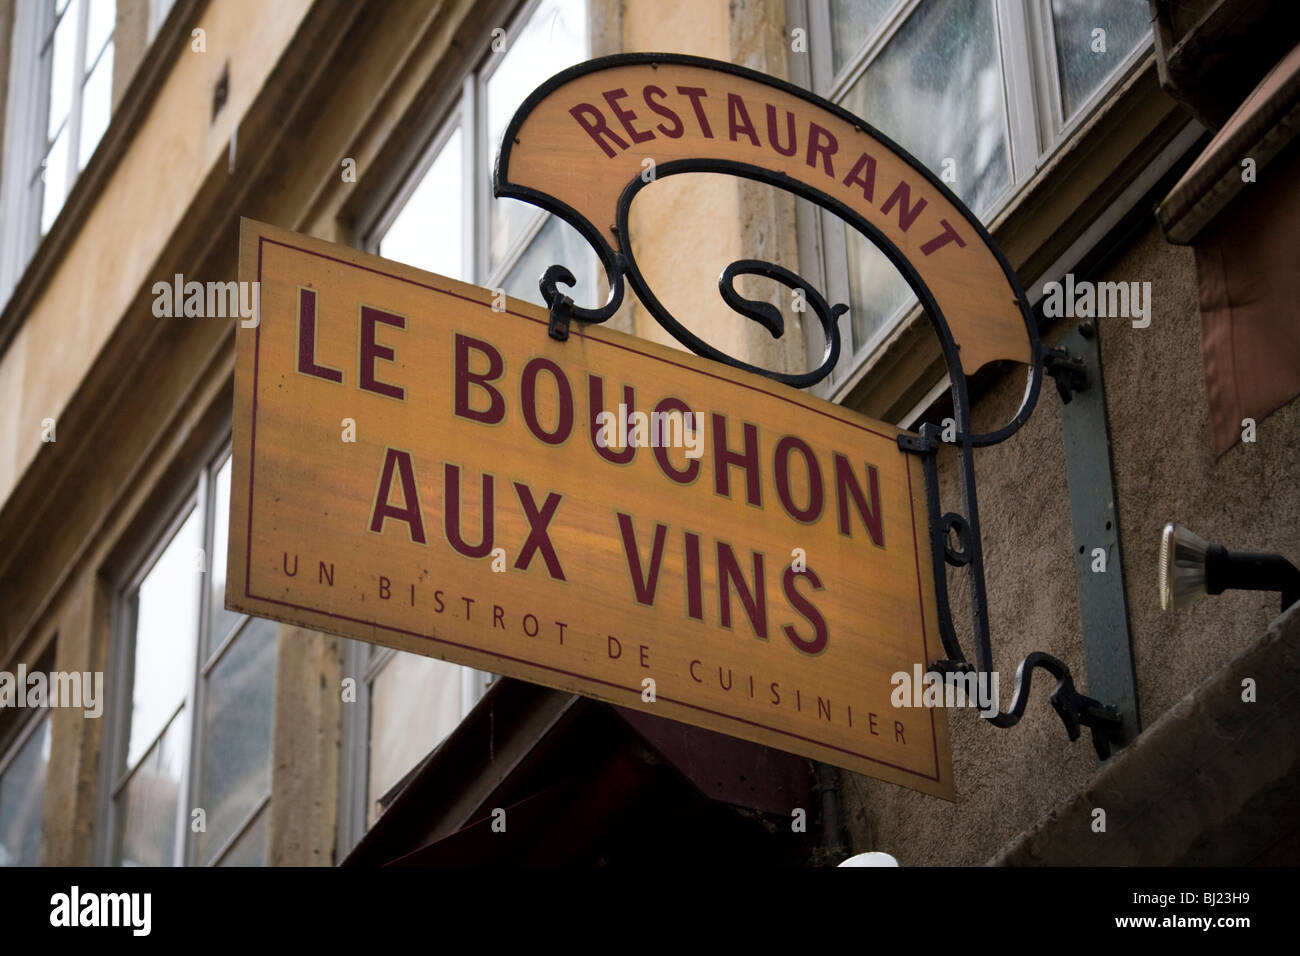 Sign outside Bouchon Aux Vins restaurant / cafe / bistro bar in the city of Lyon, France. Stock Photo